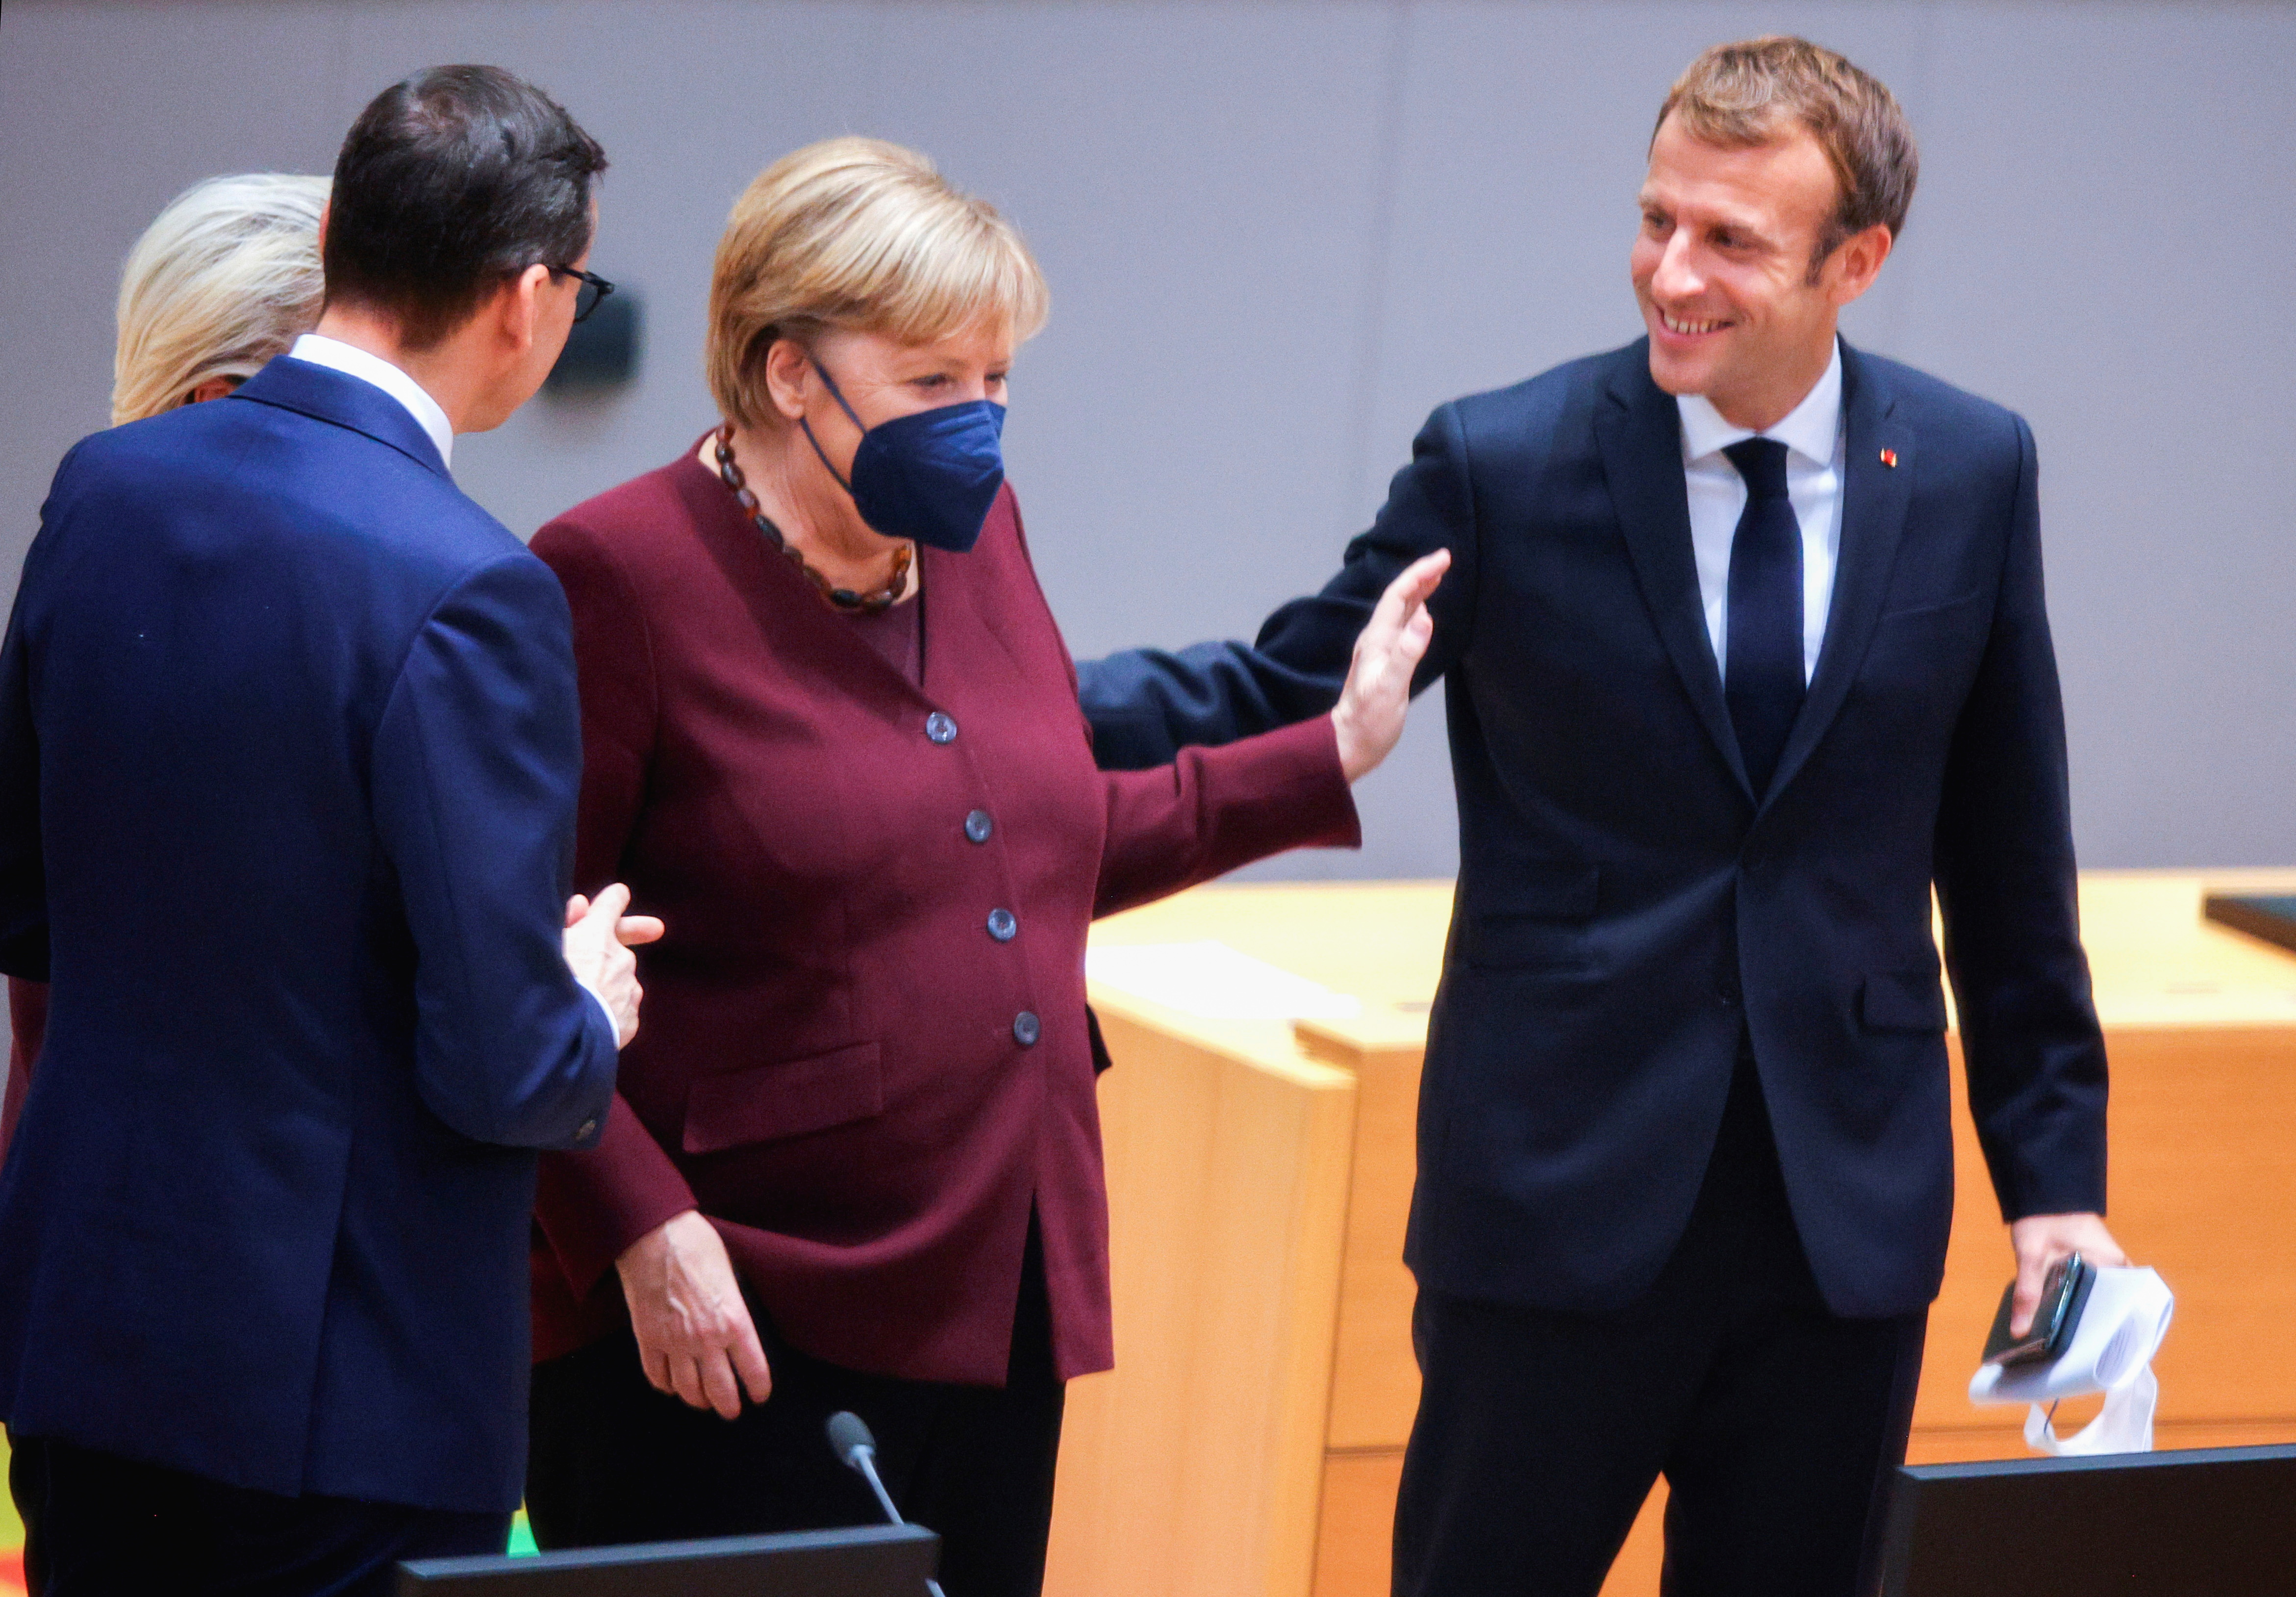 French President Emmanuel Macron speaks with German Chancellor Angela Merkel as European Commission President Ursula von der Leyen speaks with Poland’s Prime Minister Mateusz Morawiecki during a round table meeting at the EU summit in Brussels, Belgium, October 22, 2021. Olivier Matthys/Pool via REUTERS